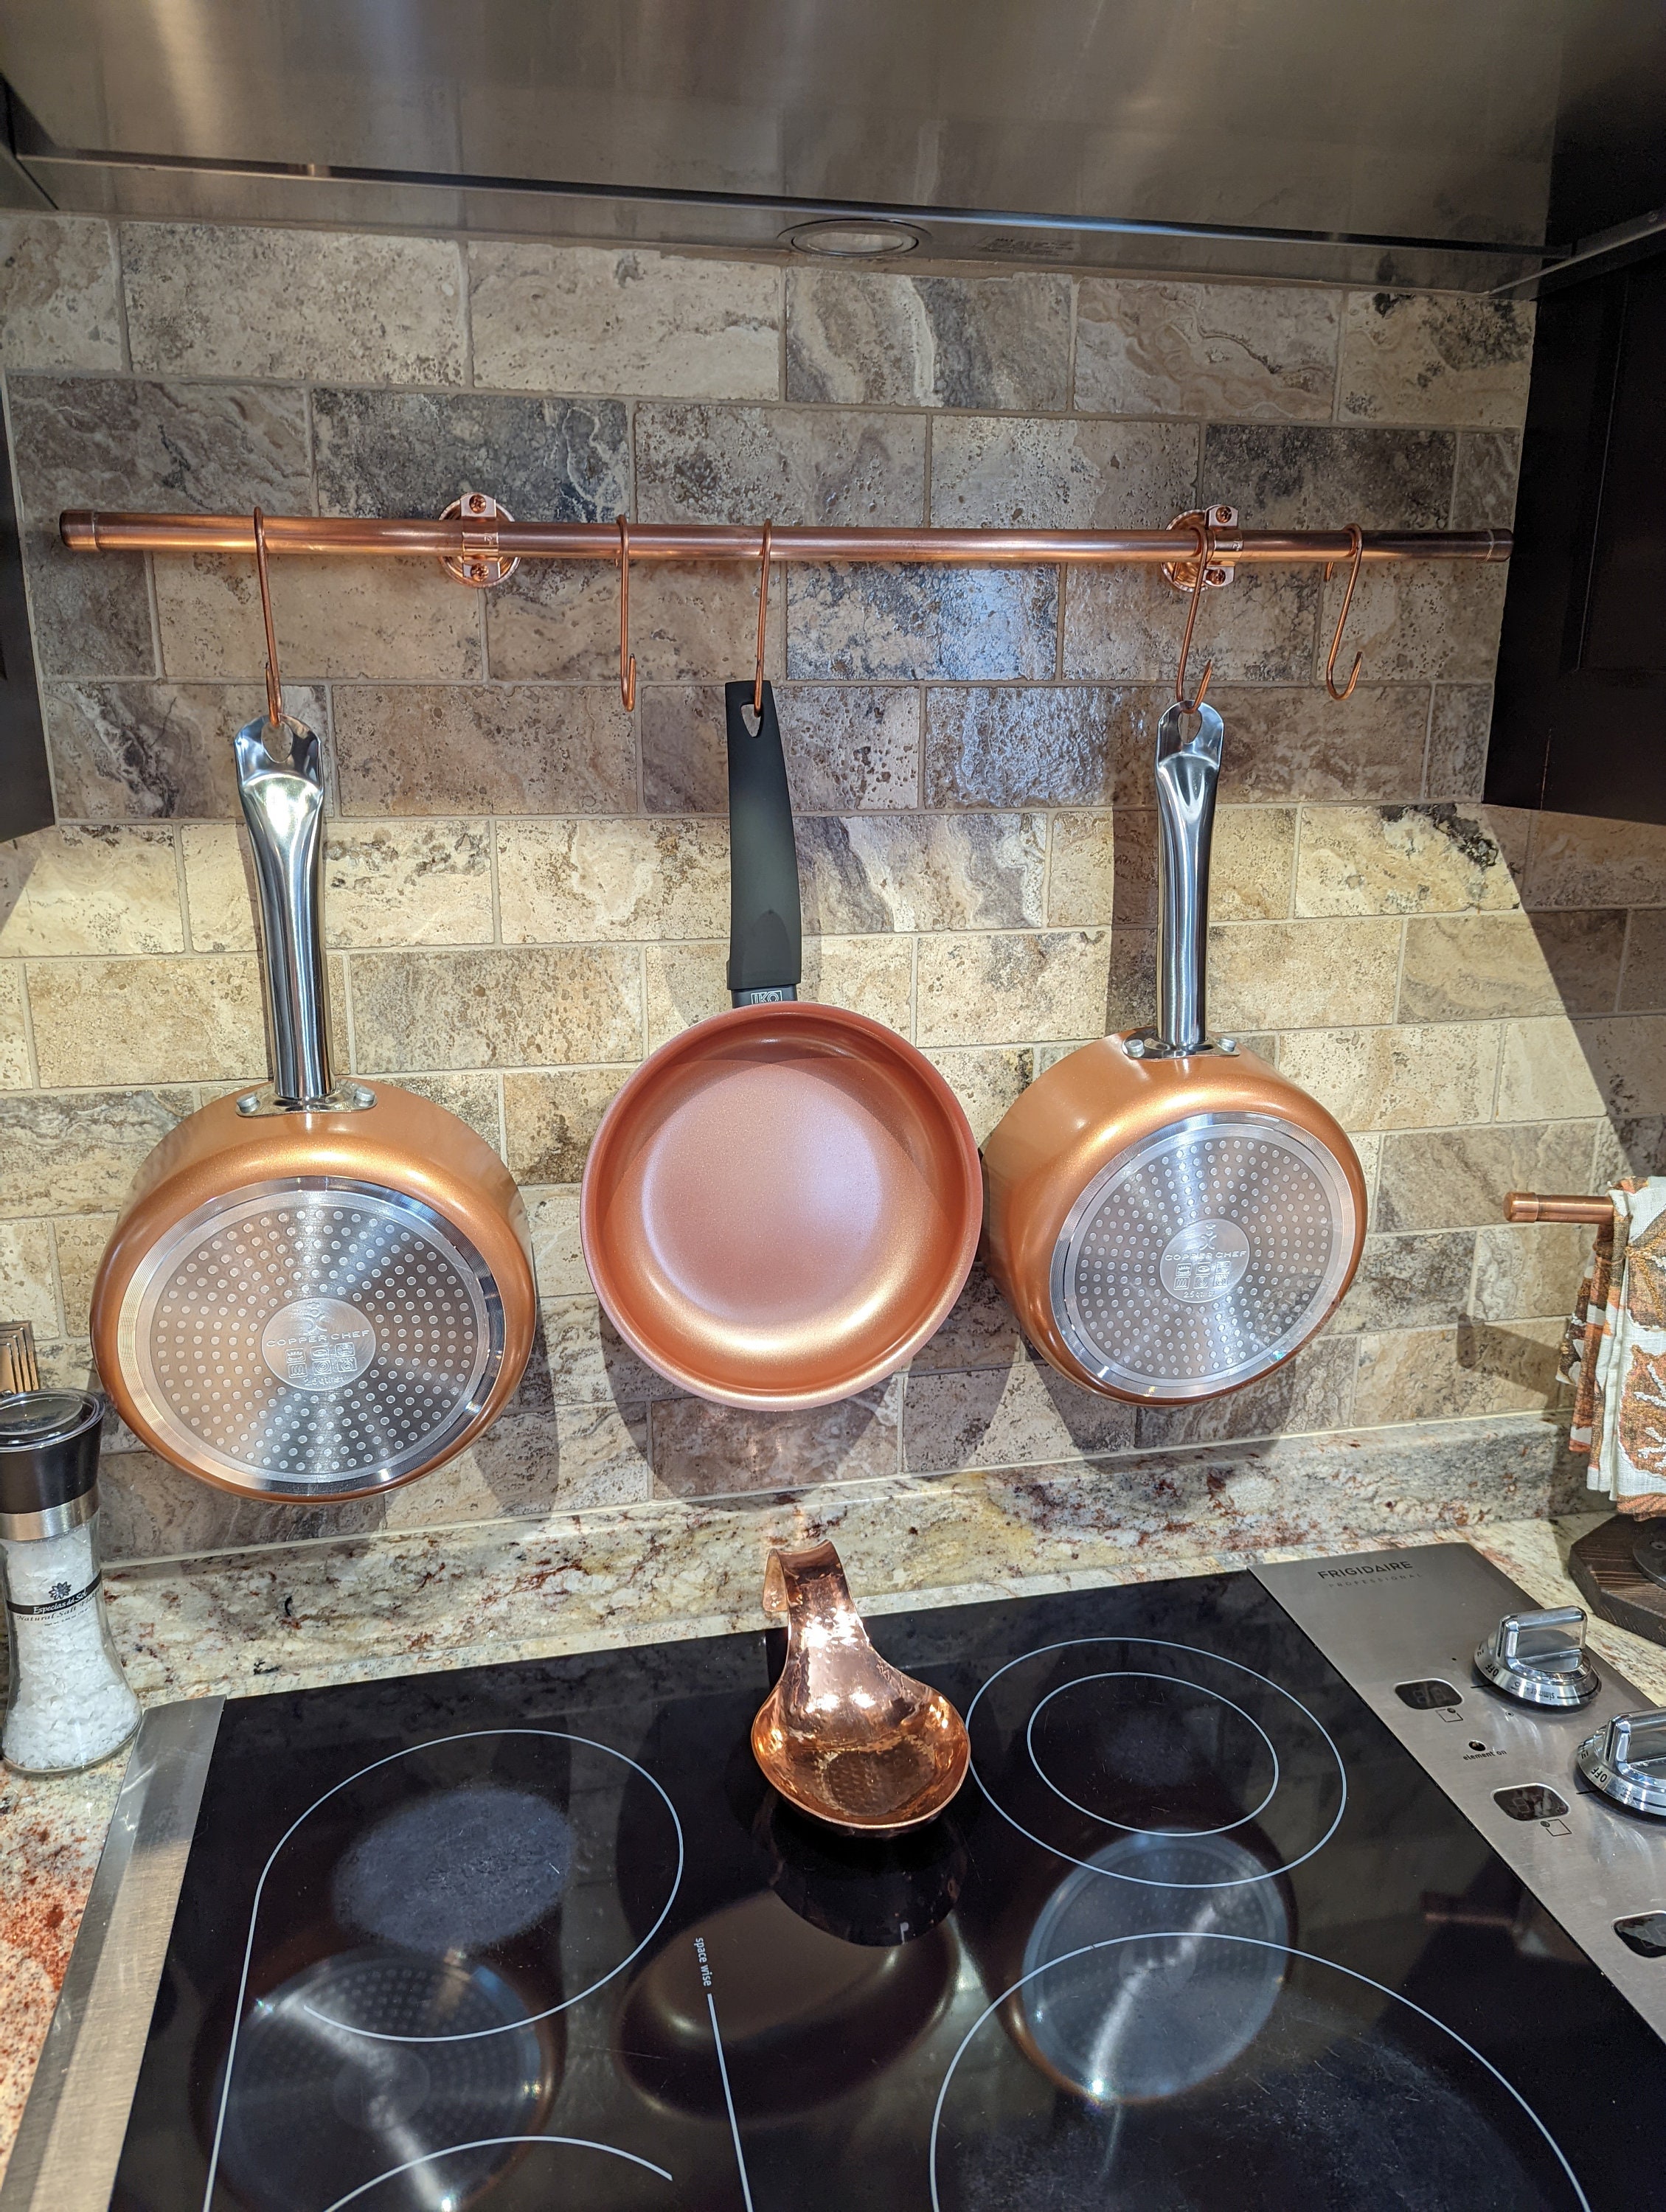 IKO 12'' Copper Collection Ceramic Fry Pan